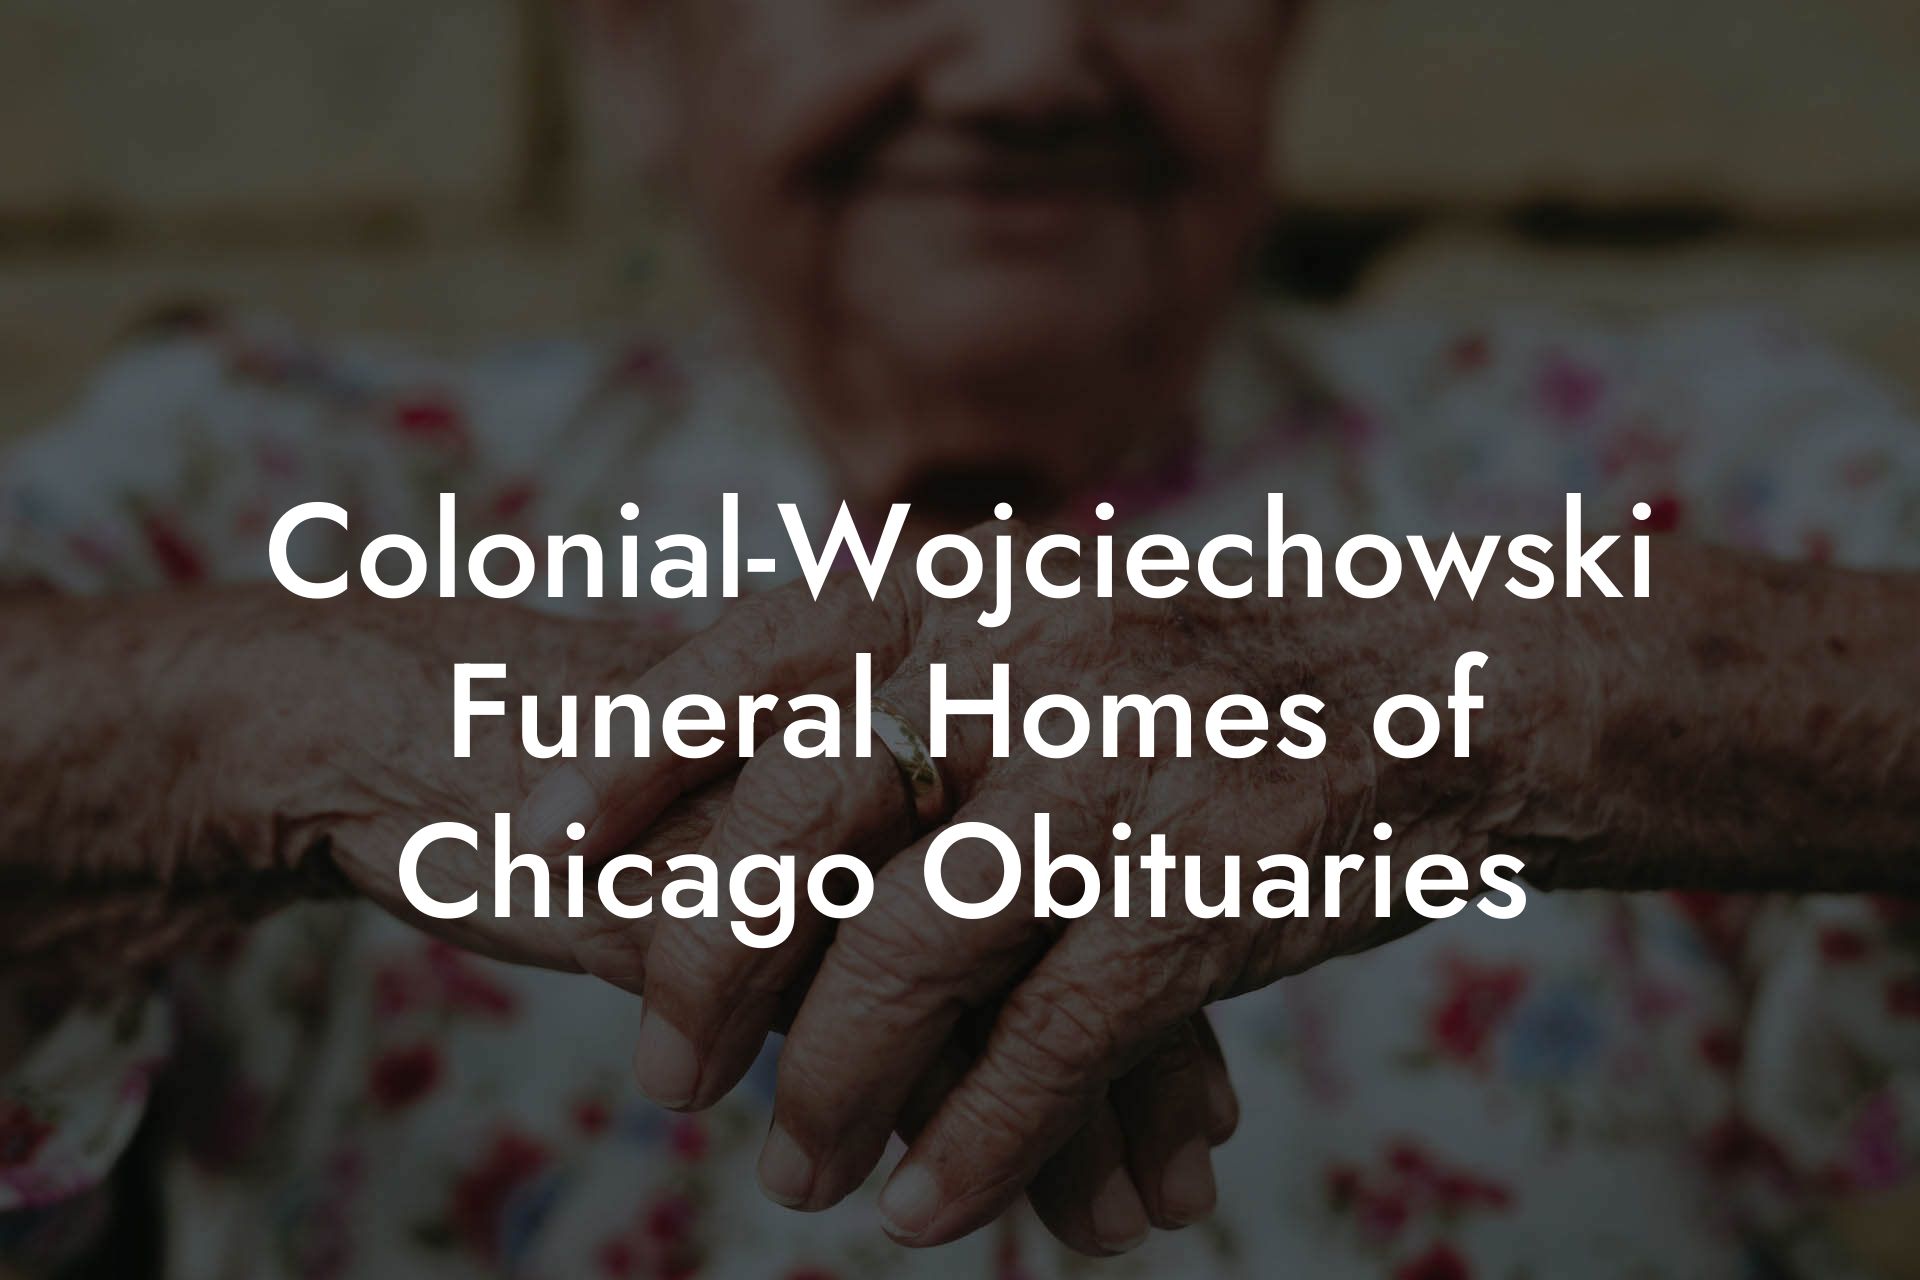 Colonial-Wojciechowski Funeral Homes of Chicago Obituaries